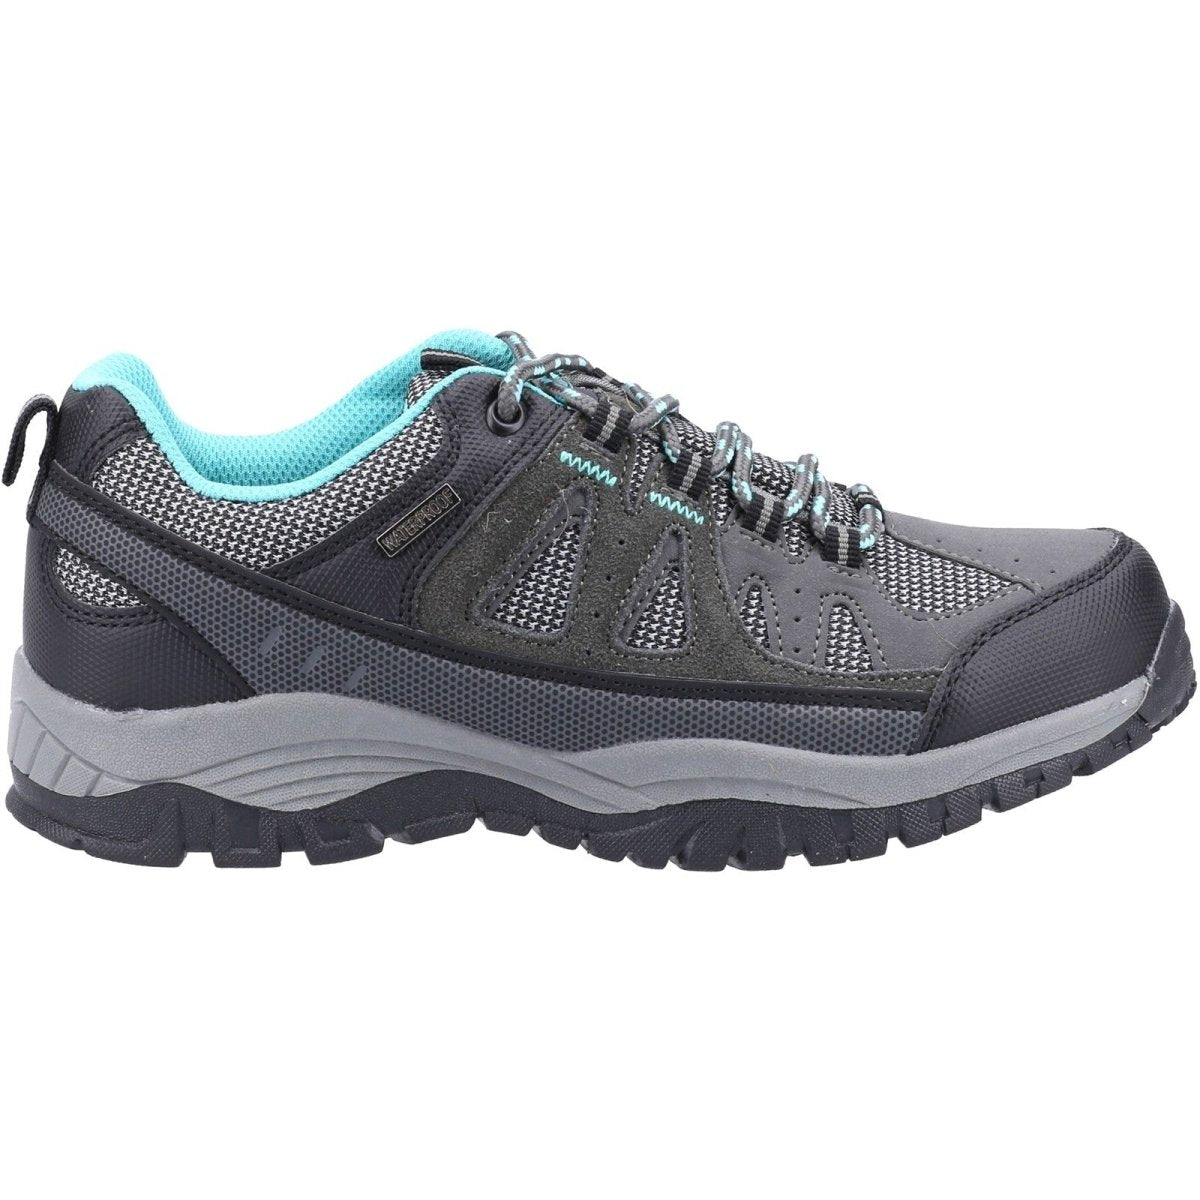 Cotswold Maisemore Low Ladies Hiking Boot - Shoe Store Direct